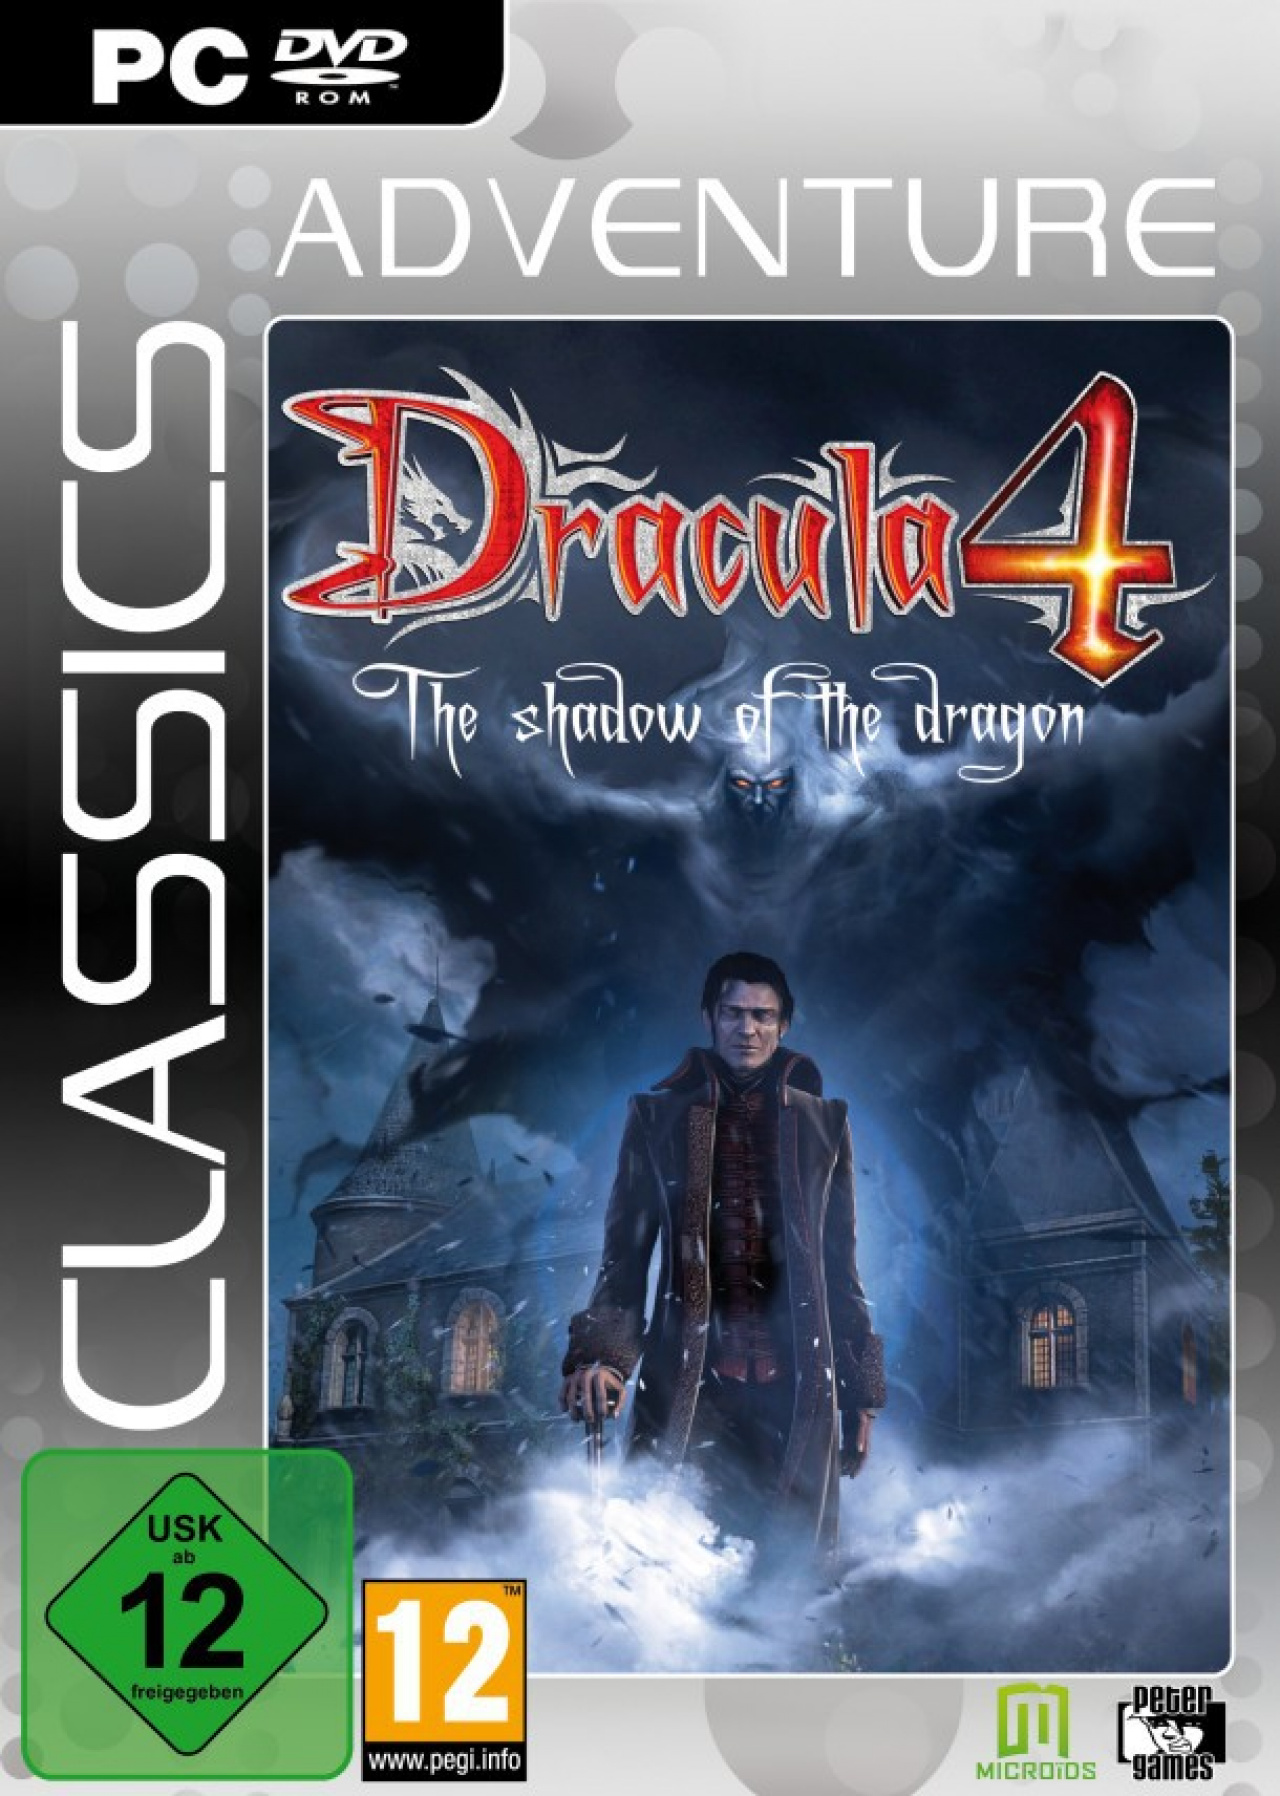 Dracula 4: The Shadow of the Dragon  Video Game Reviews and Previews PC,  PS4, Xbox One and mobile